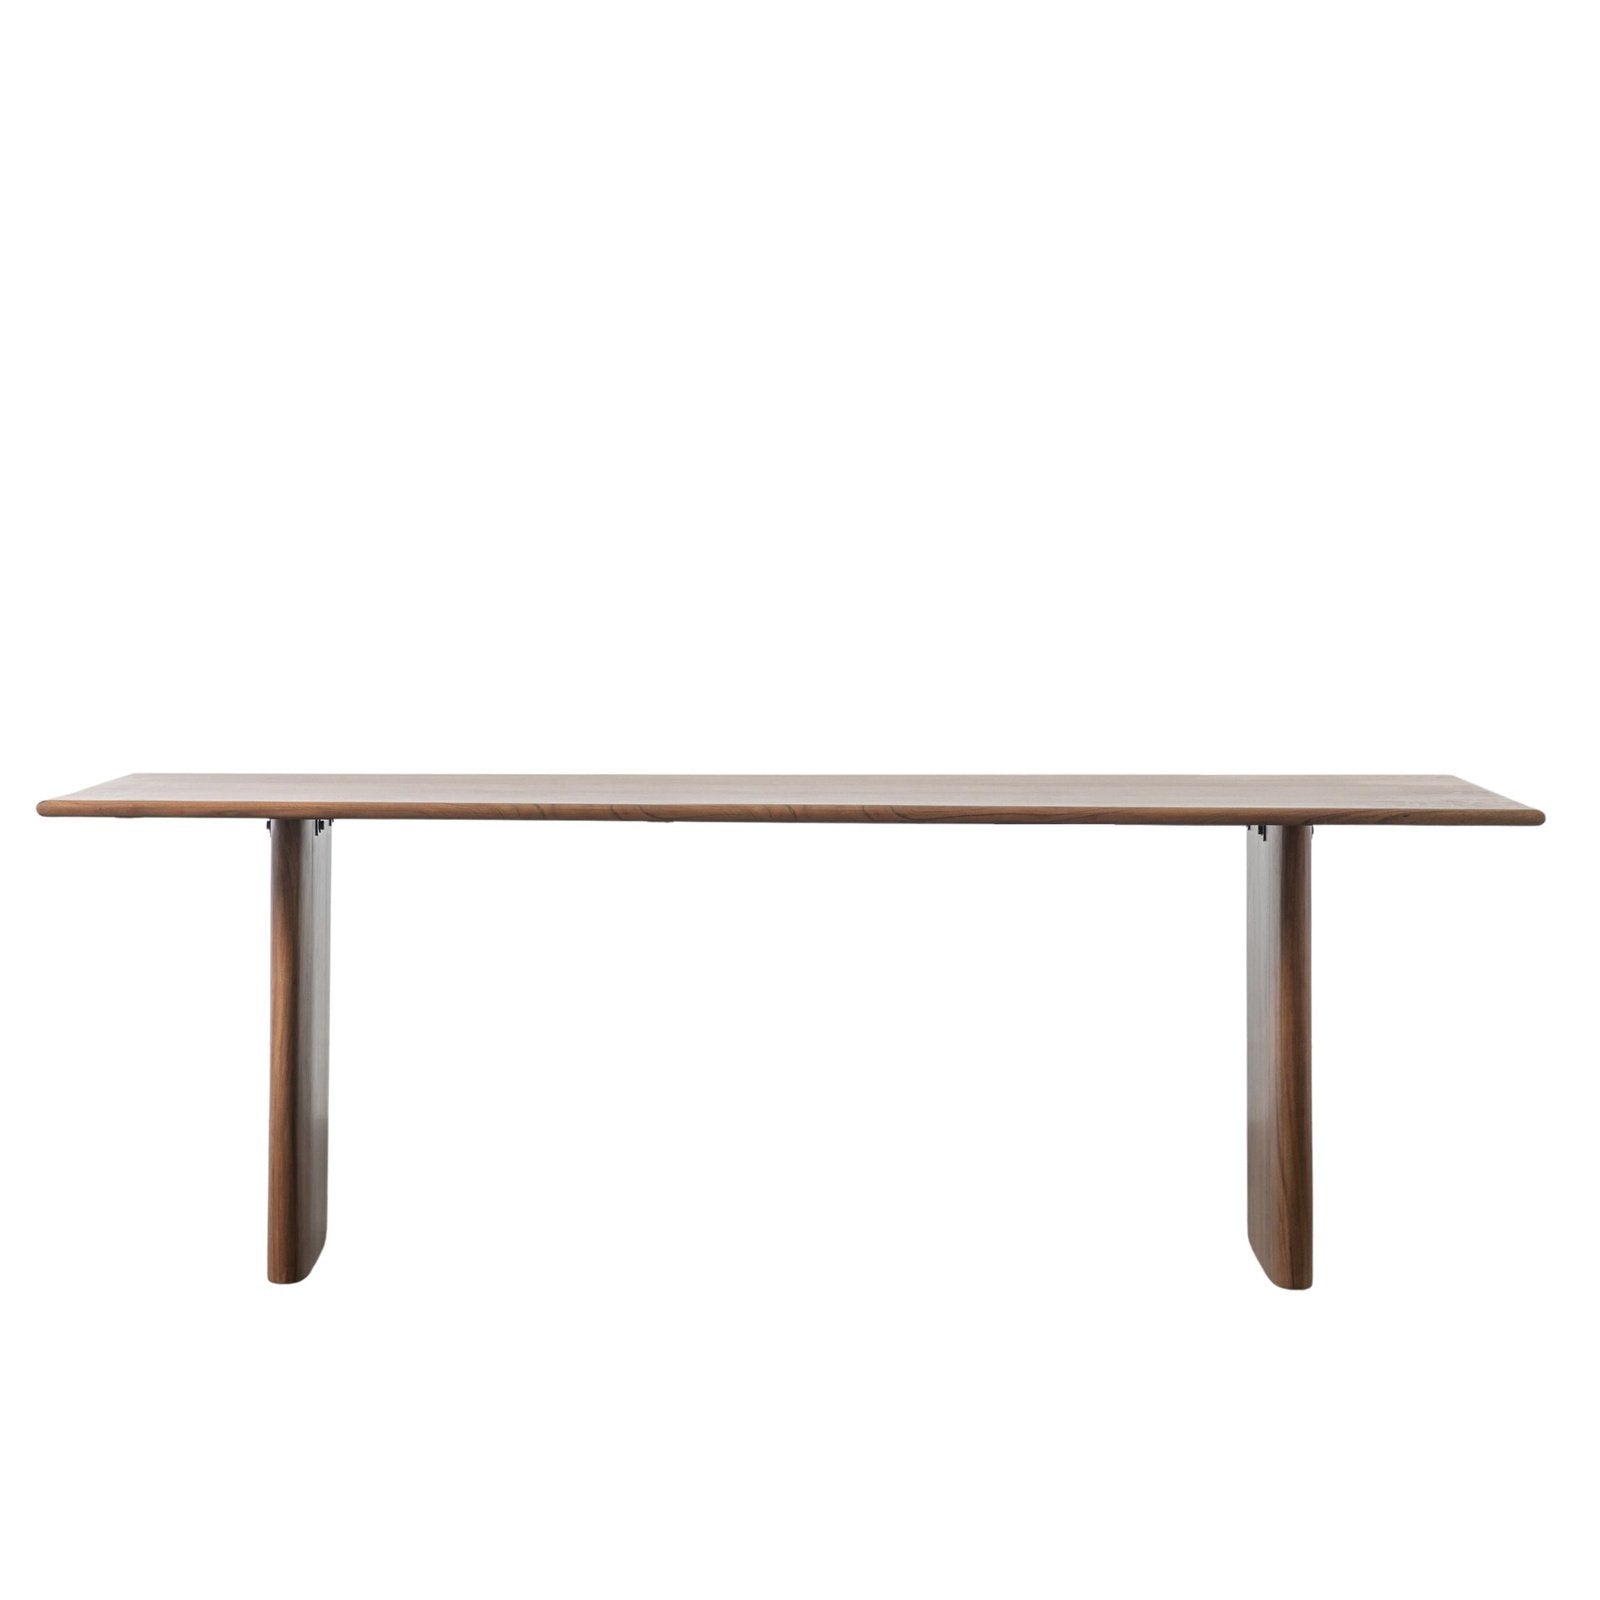 Cashmere Dining Table - Solid Acacia Wood & Iron - Warm Natural Finish - Modern Rustic Style